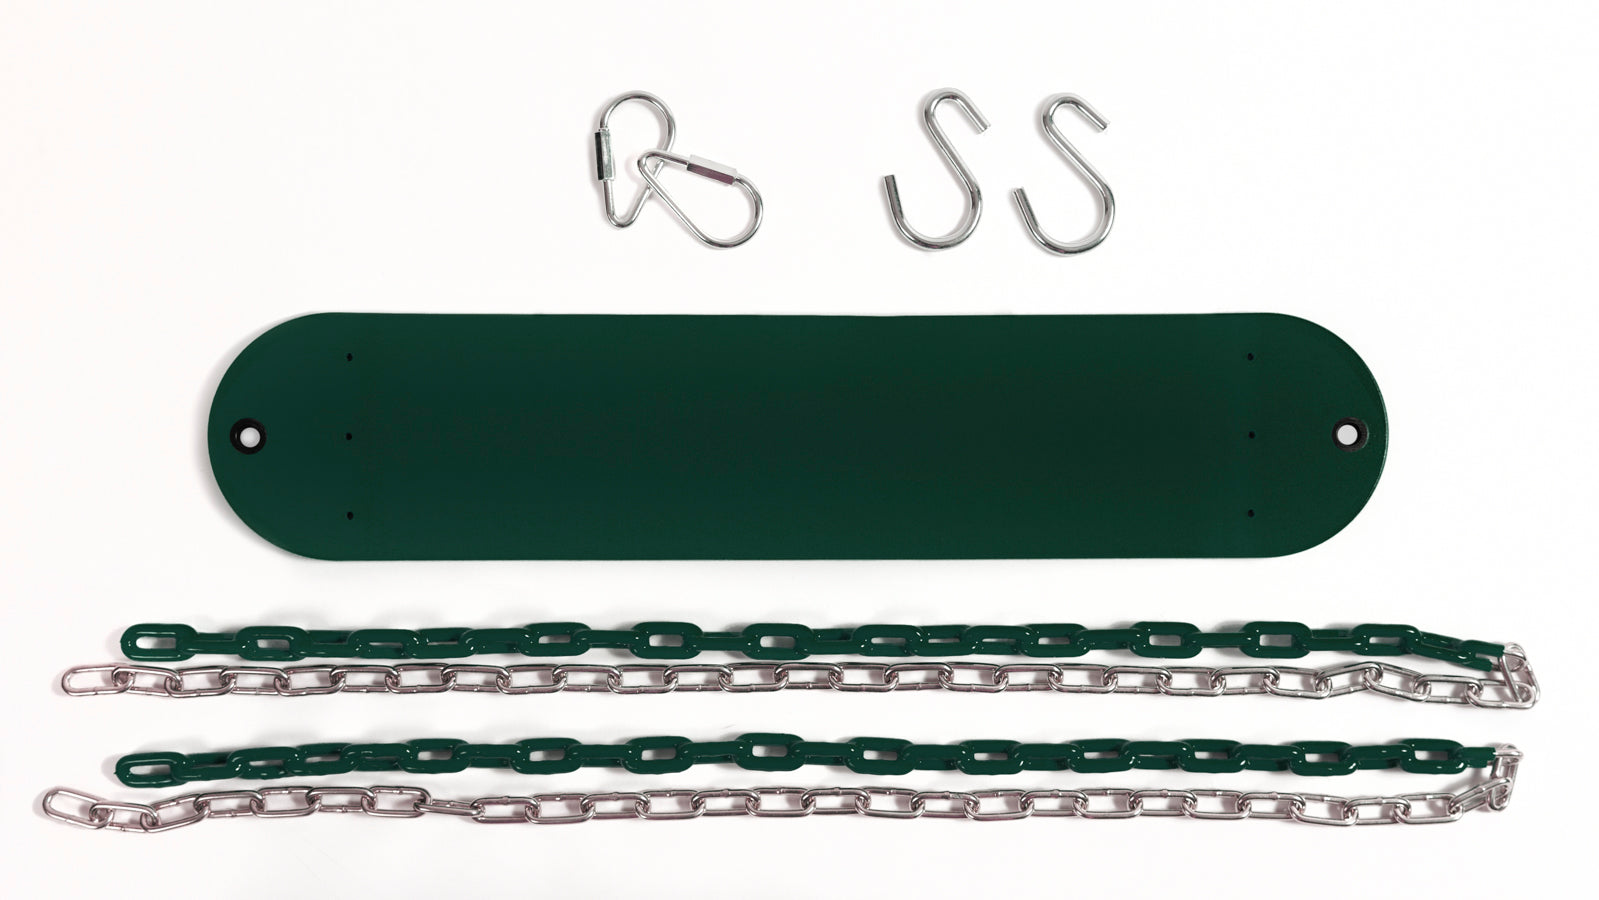 Belt Swing Kit with PVC Coated 66" Chains and hardware for installation is perfect for outdoor play sets, jungle gyms, and playgrounds.